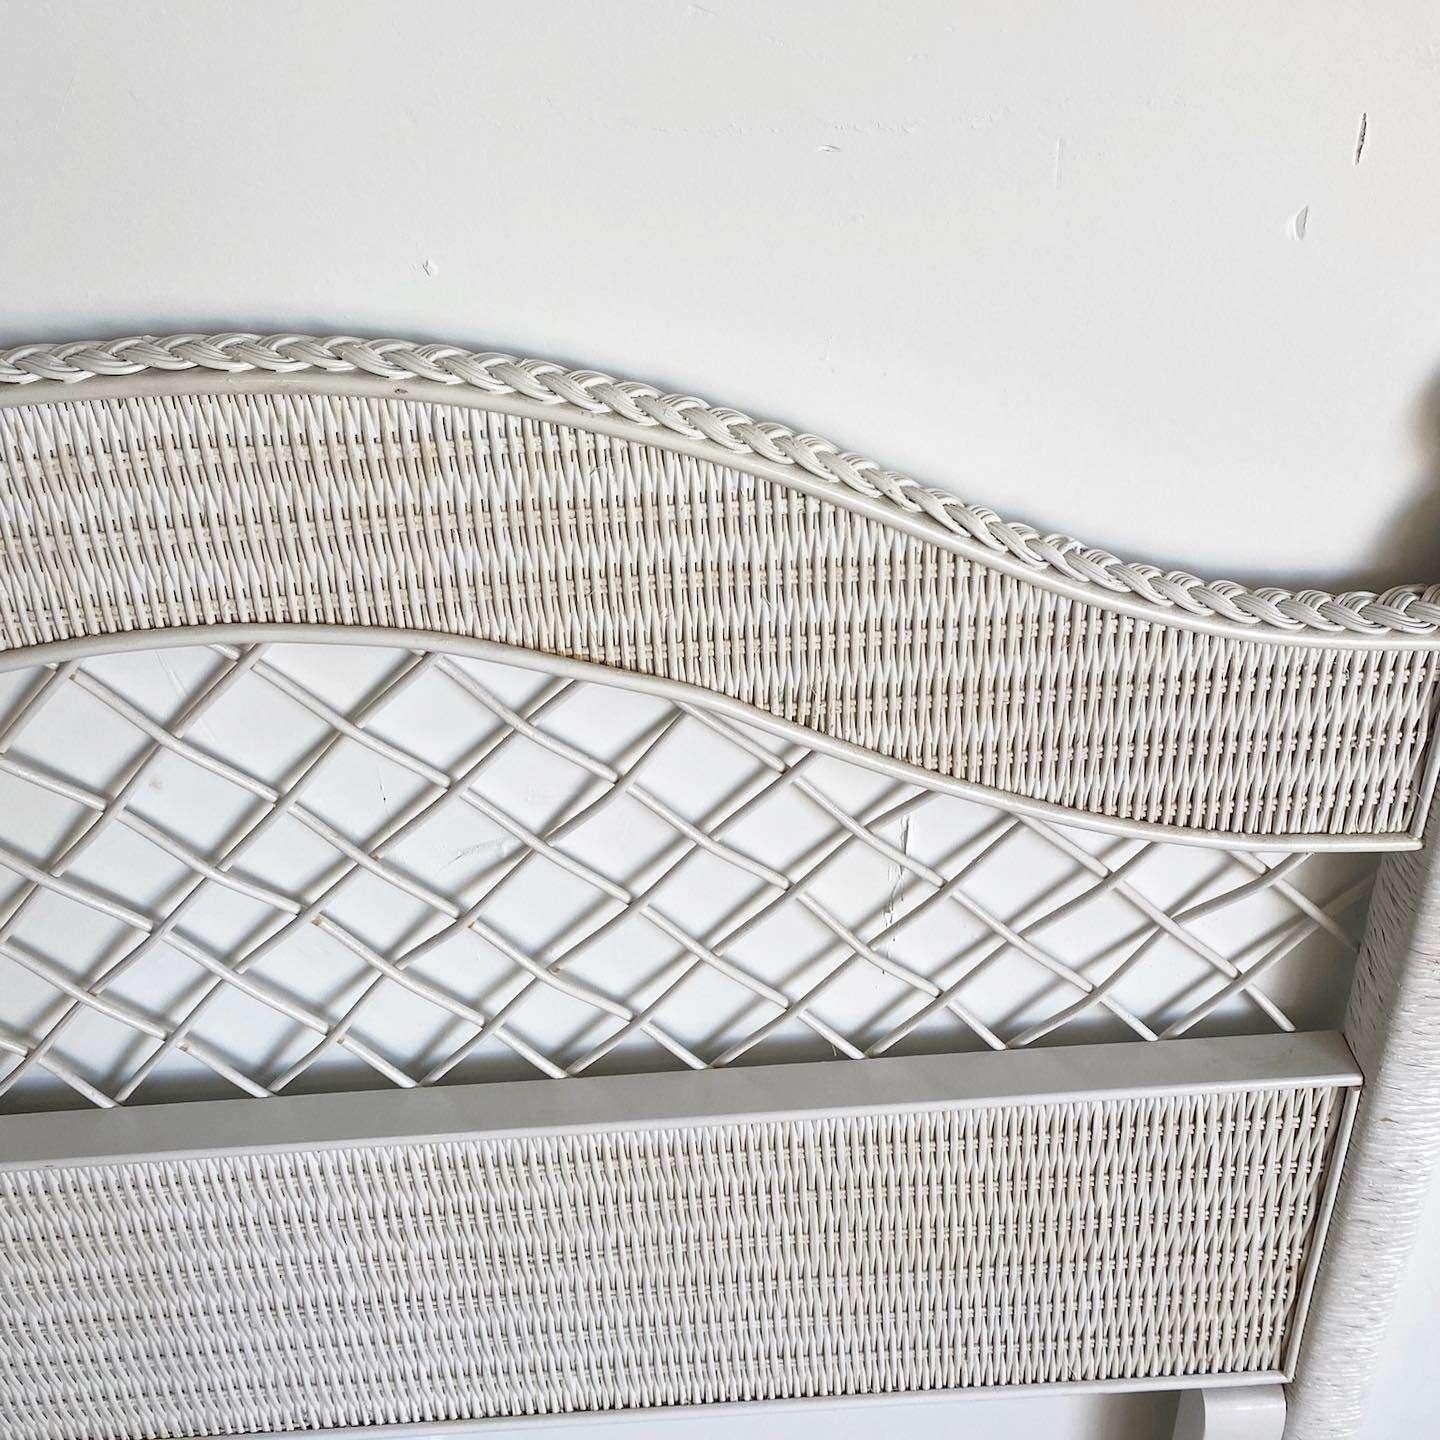 Boho Chic White Wicker Headboard by Henry Link In Good Condition For Sale In Delray Beach, FL